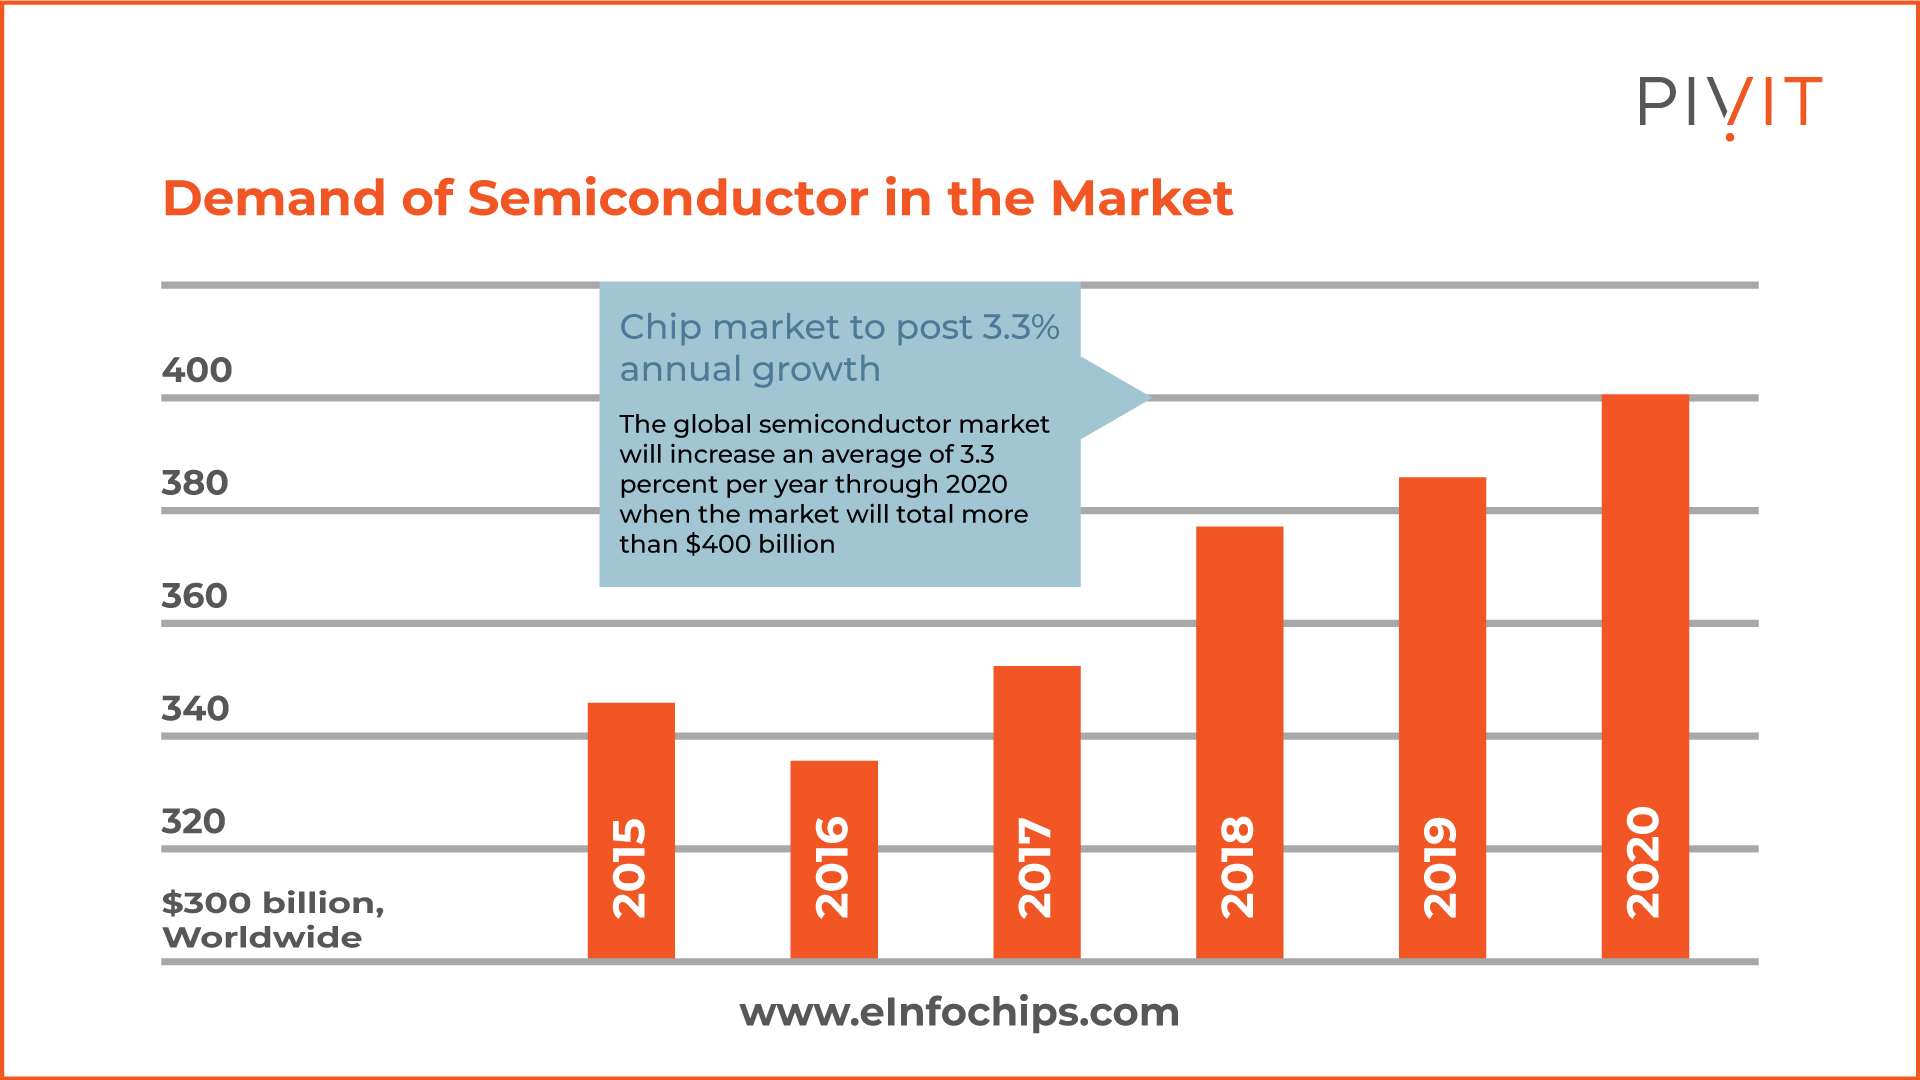 Bar graph indicating the demand of semiconductors in the market